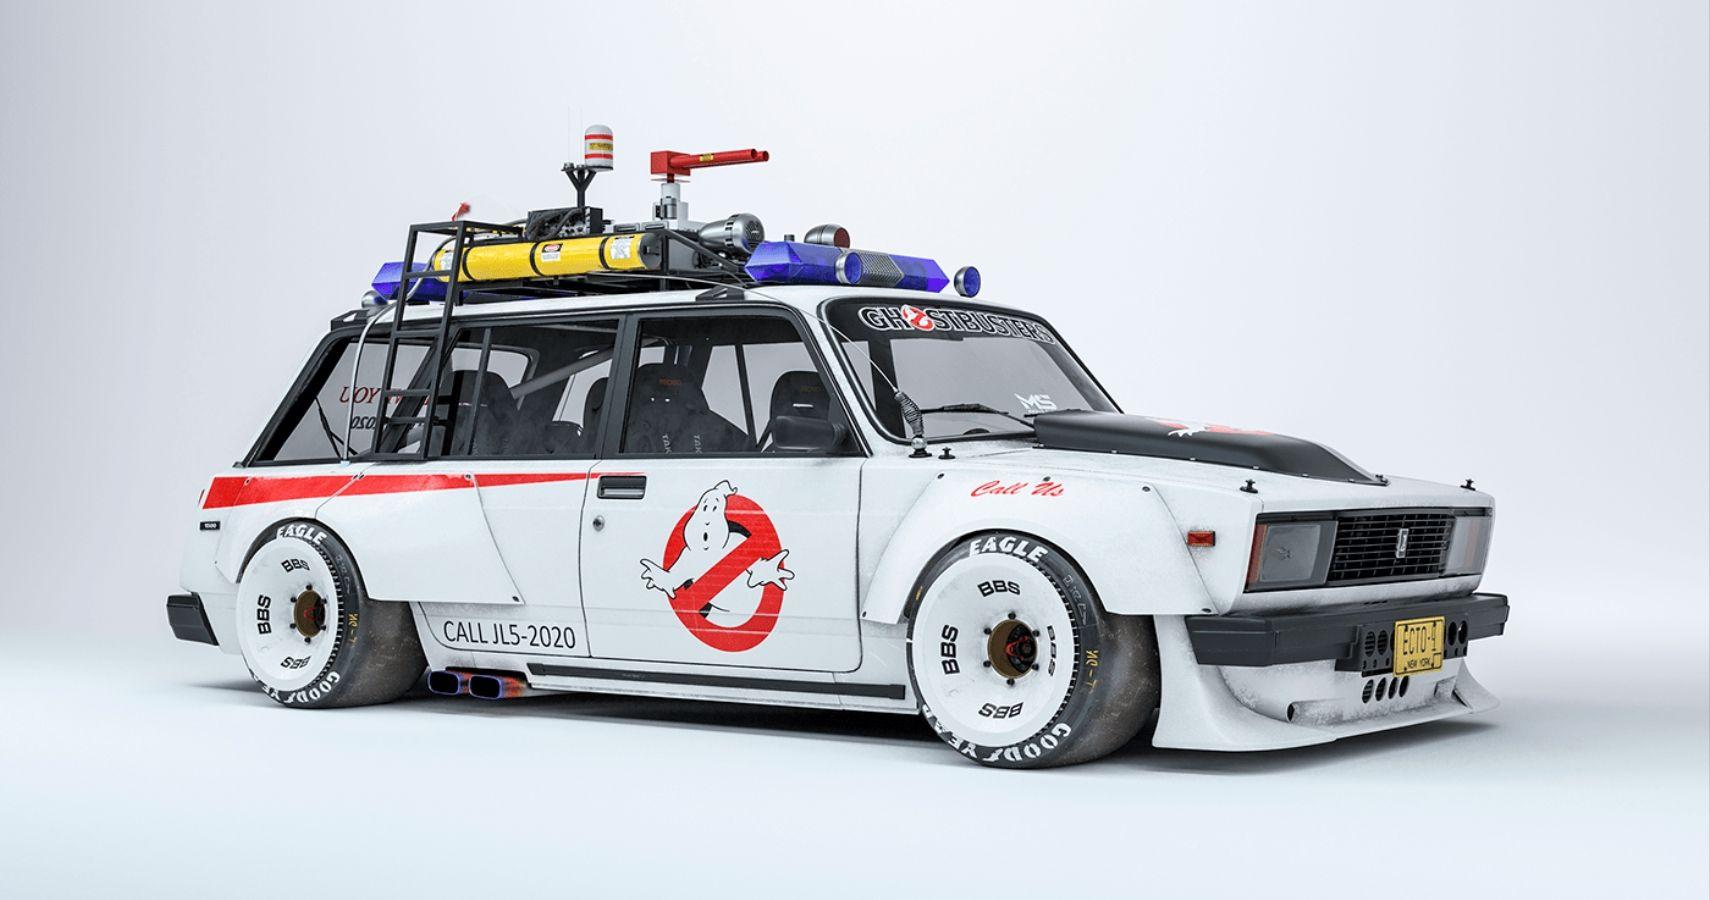 When you combine 'Ghostbusters' and the Lada 2104, you get the Ecto-4 | modifiedrides.net